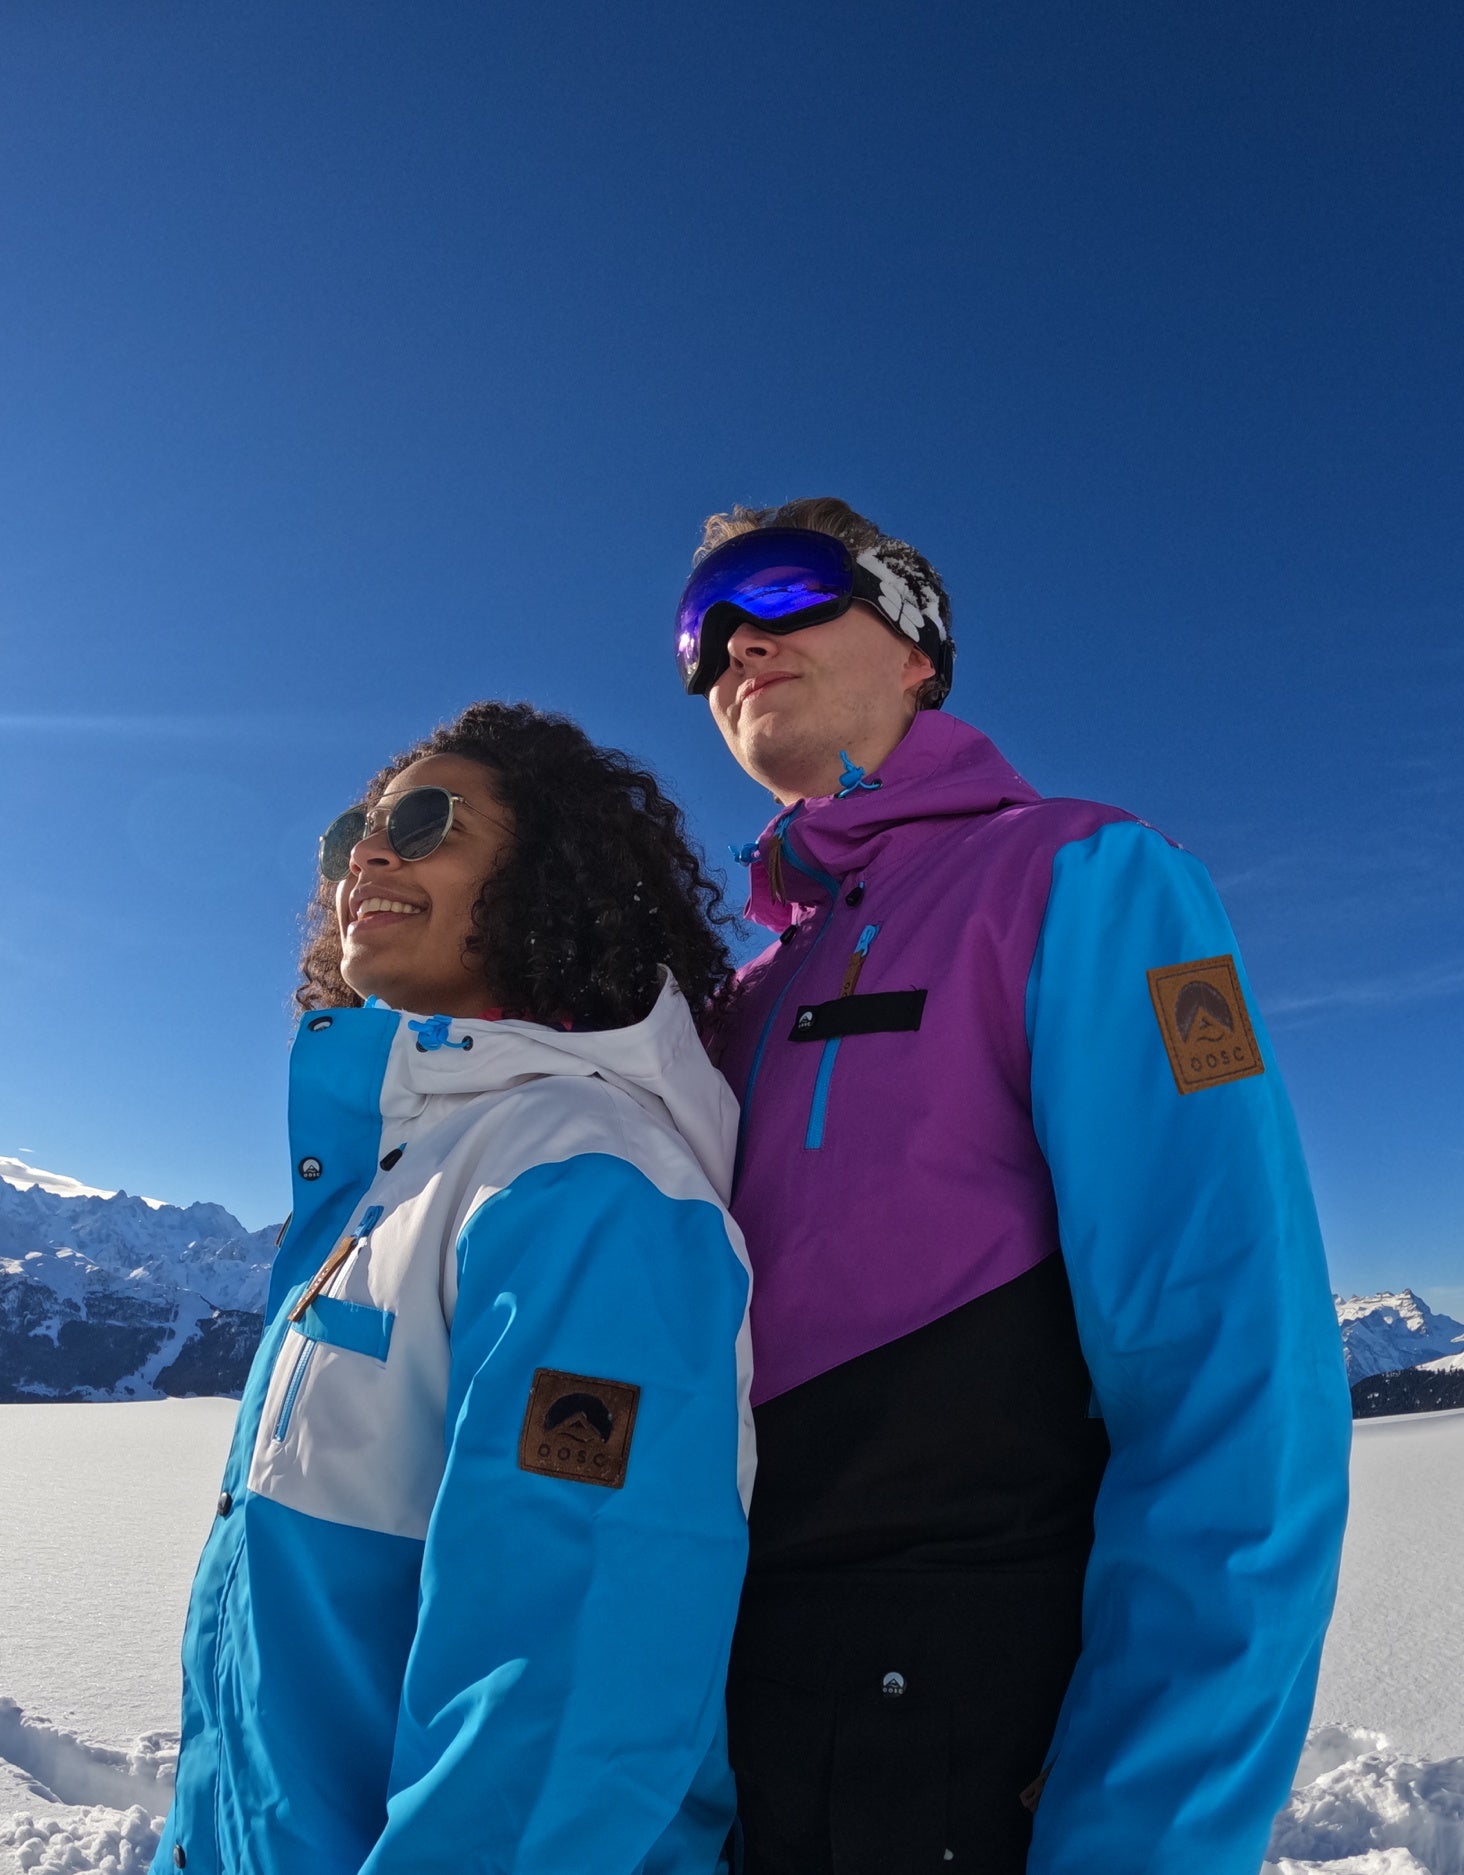 Repræsentere Mos Bloom Ski Suits | Retro-Styled, Sustainable Ski Wear – OOSC Clothing